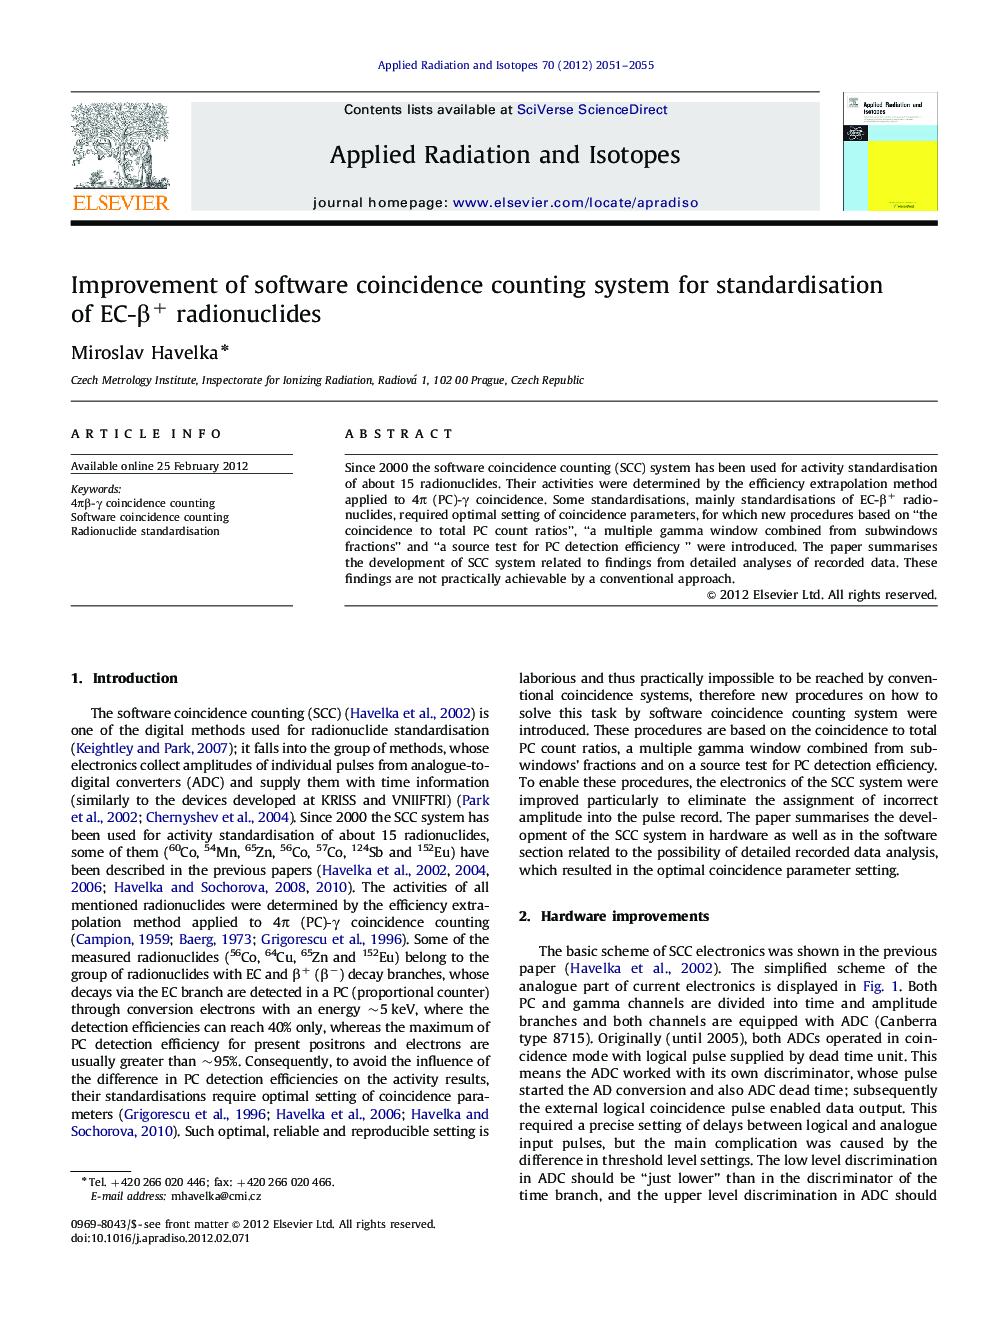 Improvement of software coincidence counting system for standardisation of EC-Î²+ radionuclides